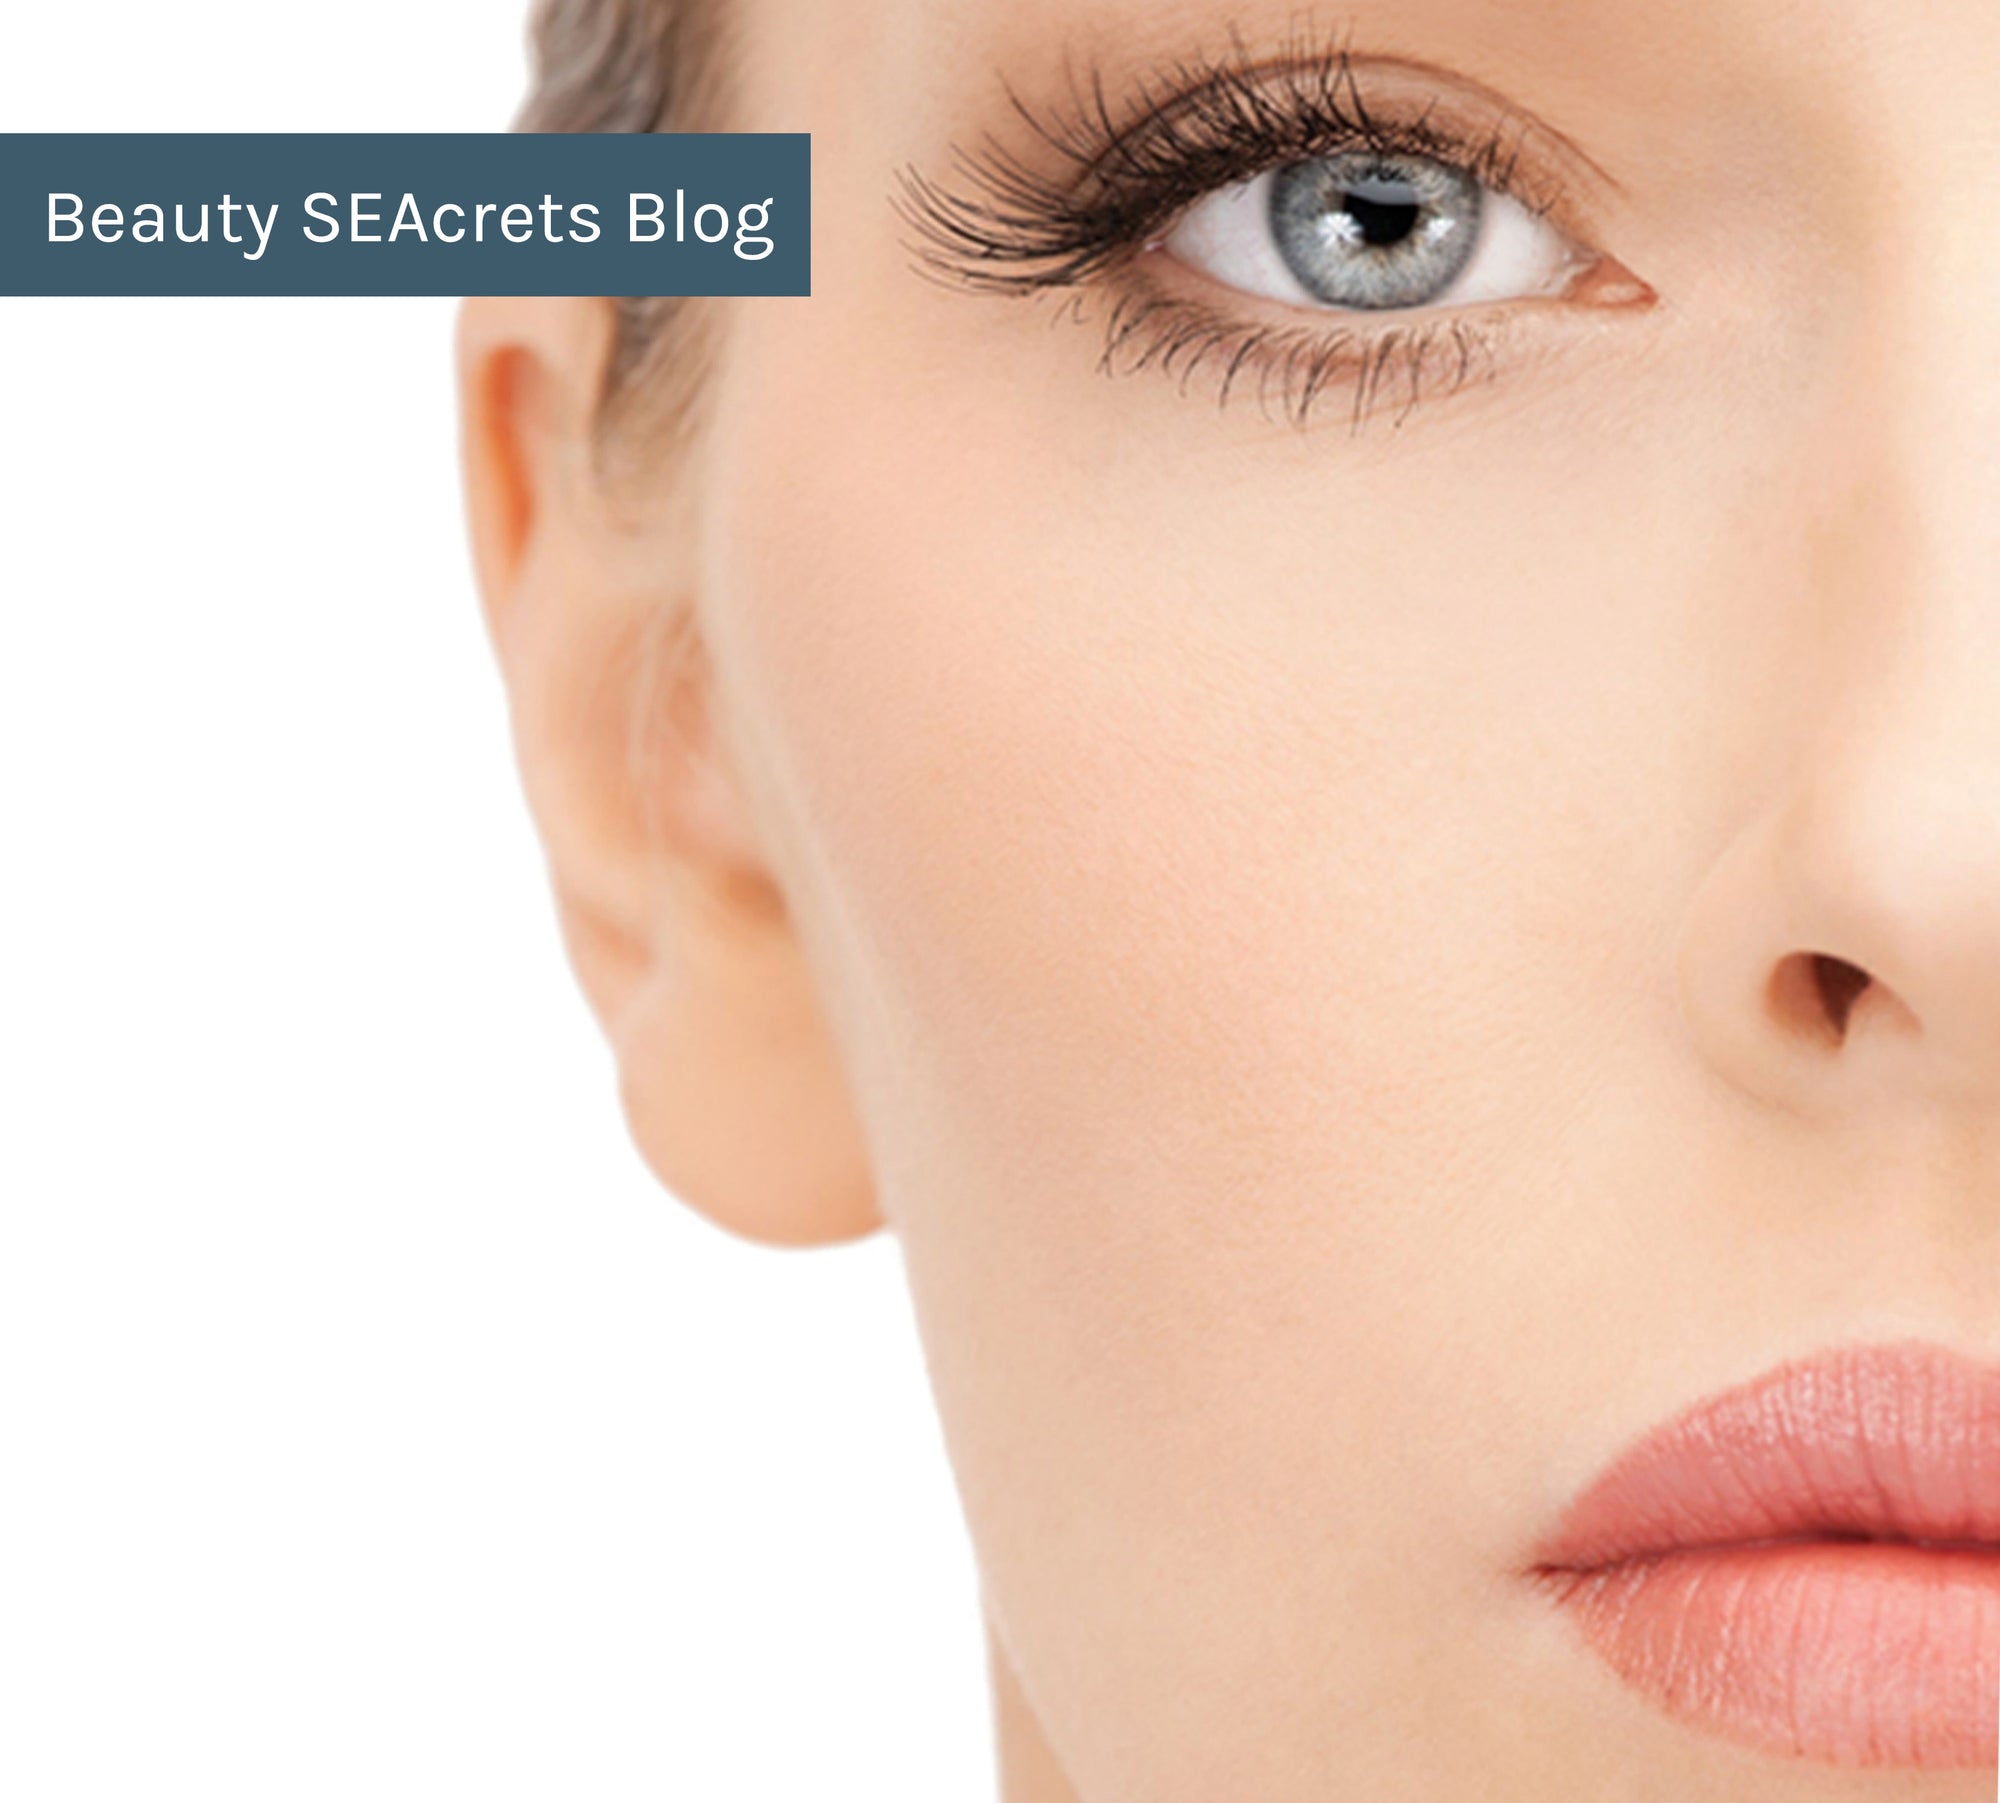 Dark Under Eye Circles and Puffy Eyes? Fall Beauty Tips for Tired Eyes